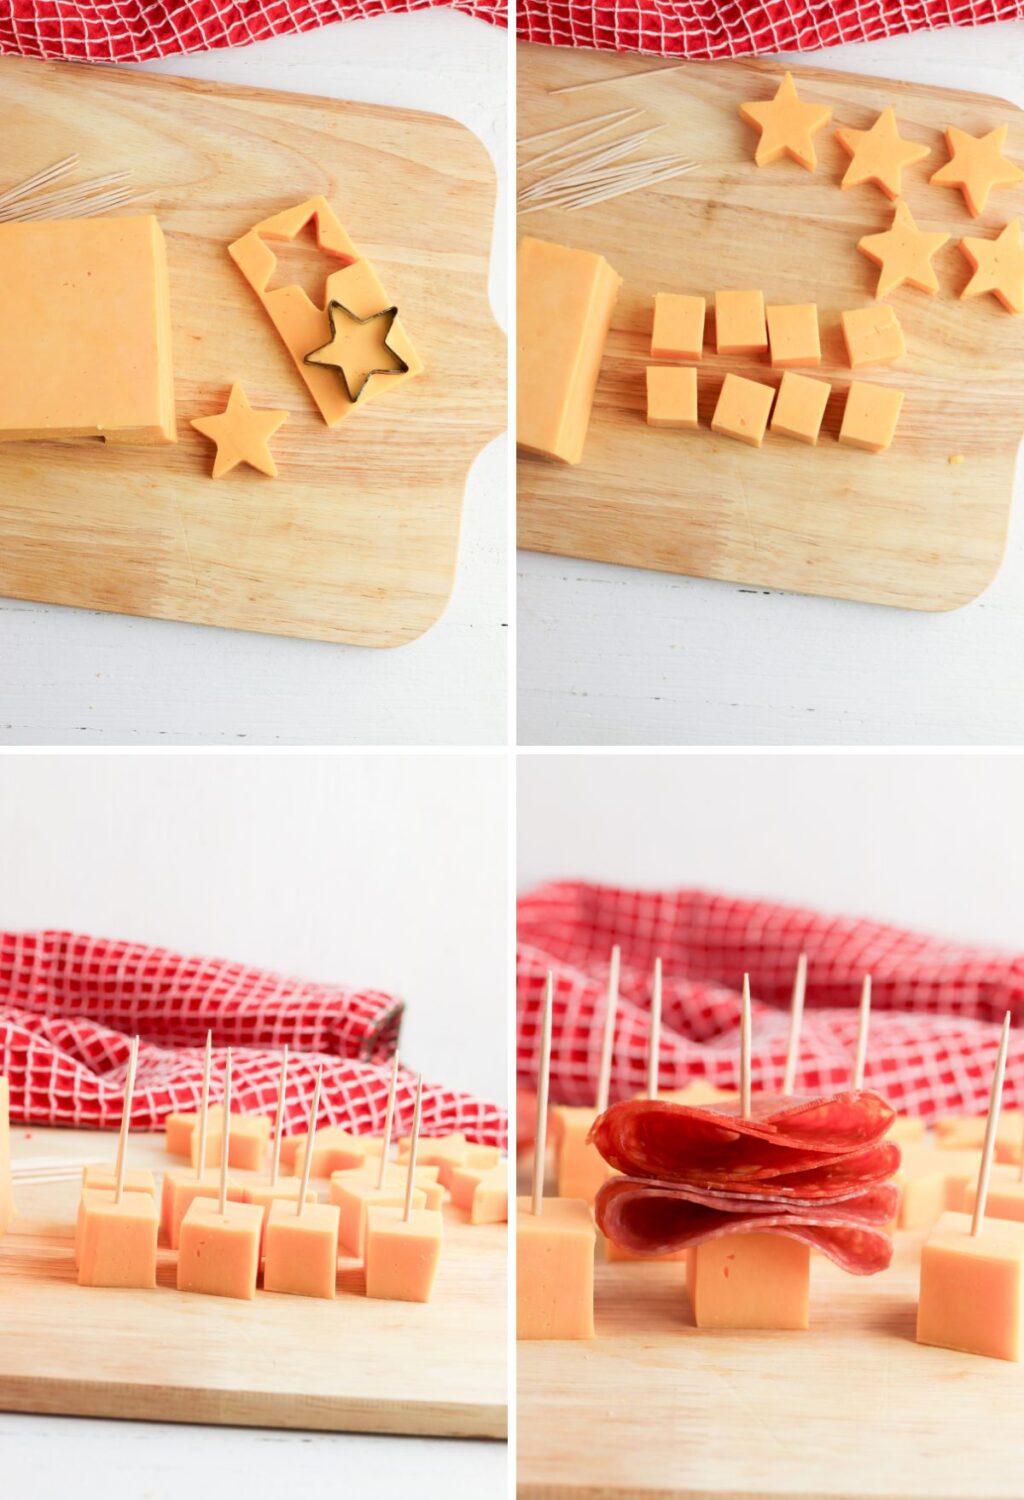 A series of pictures showing how to make cheese sticks.